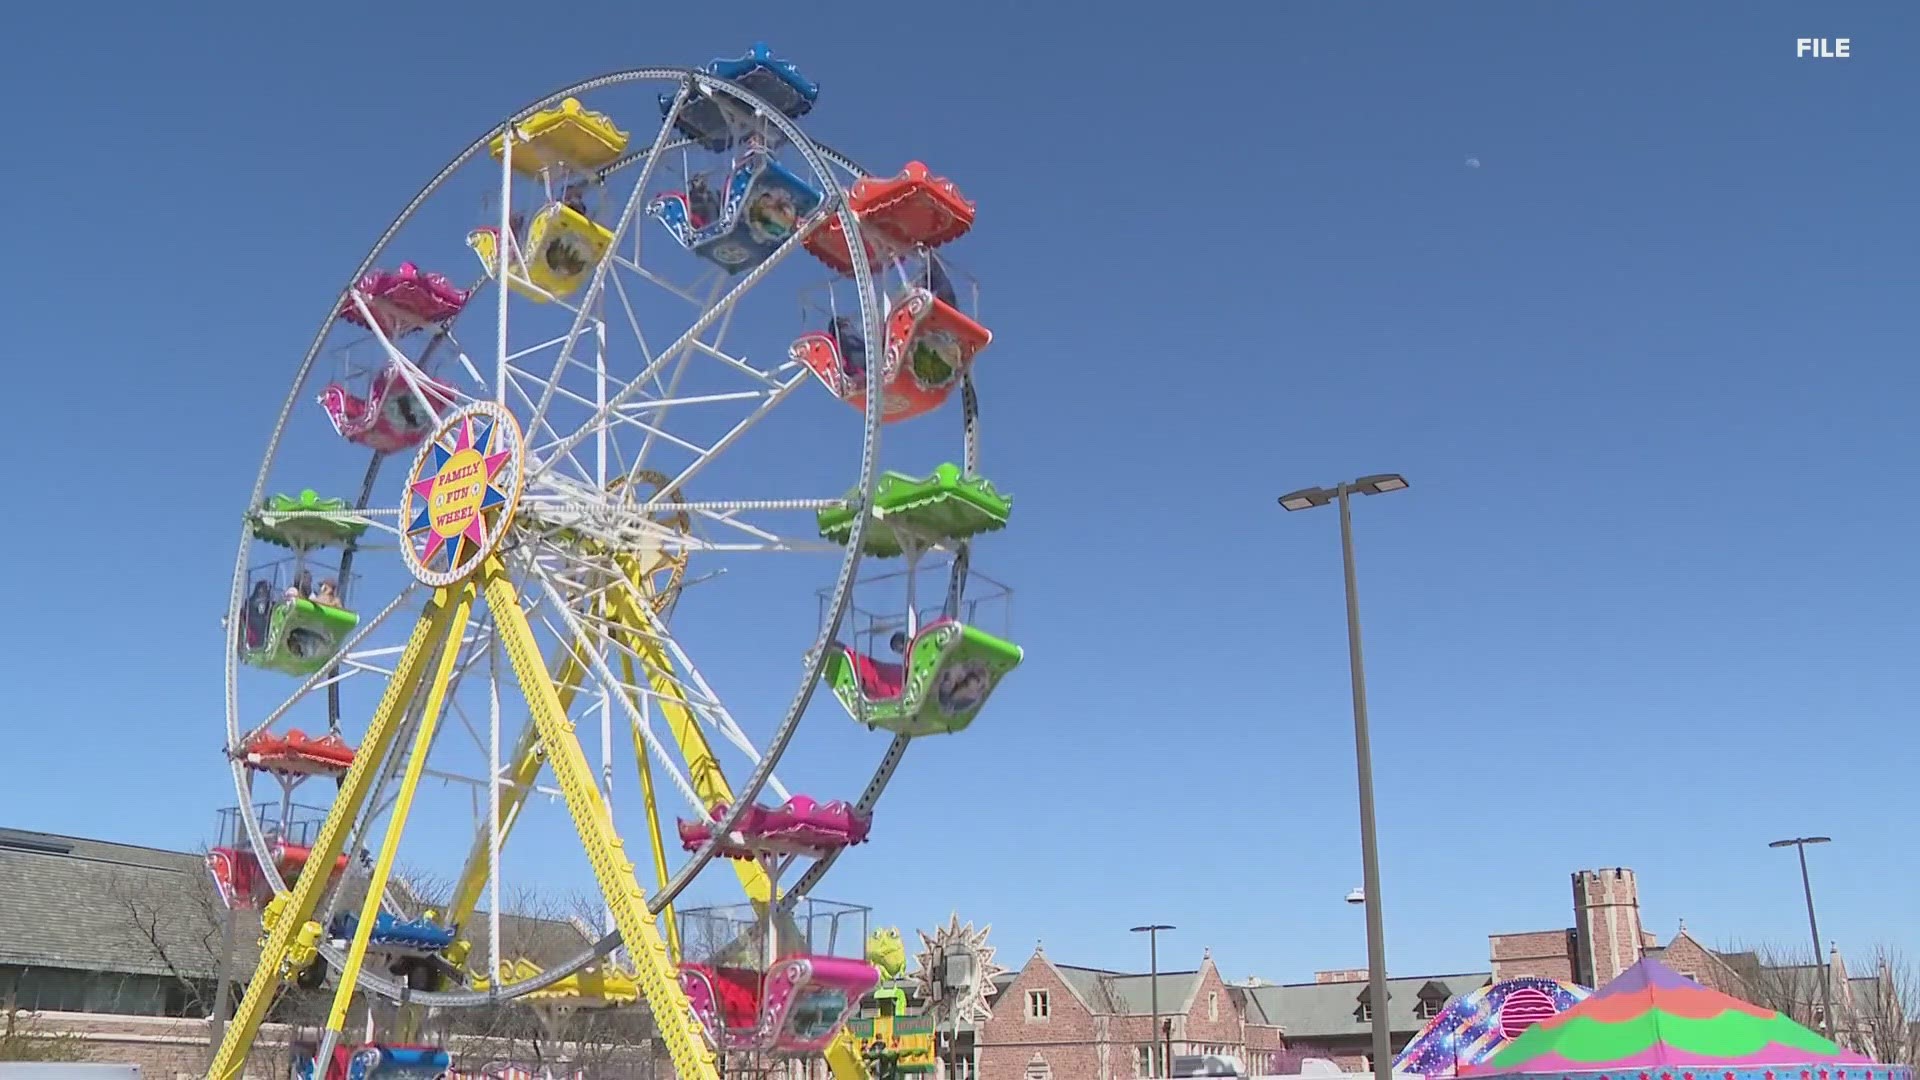 Washington University shut down the ThurtenE Carnival early due to safety concerns after small groups began fighting. Then, they canceled the event on Sunday.